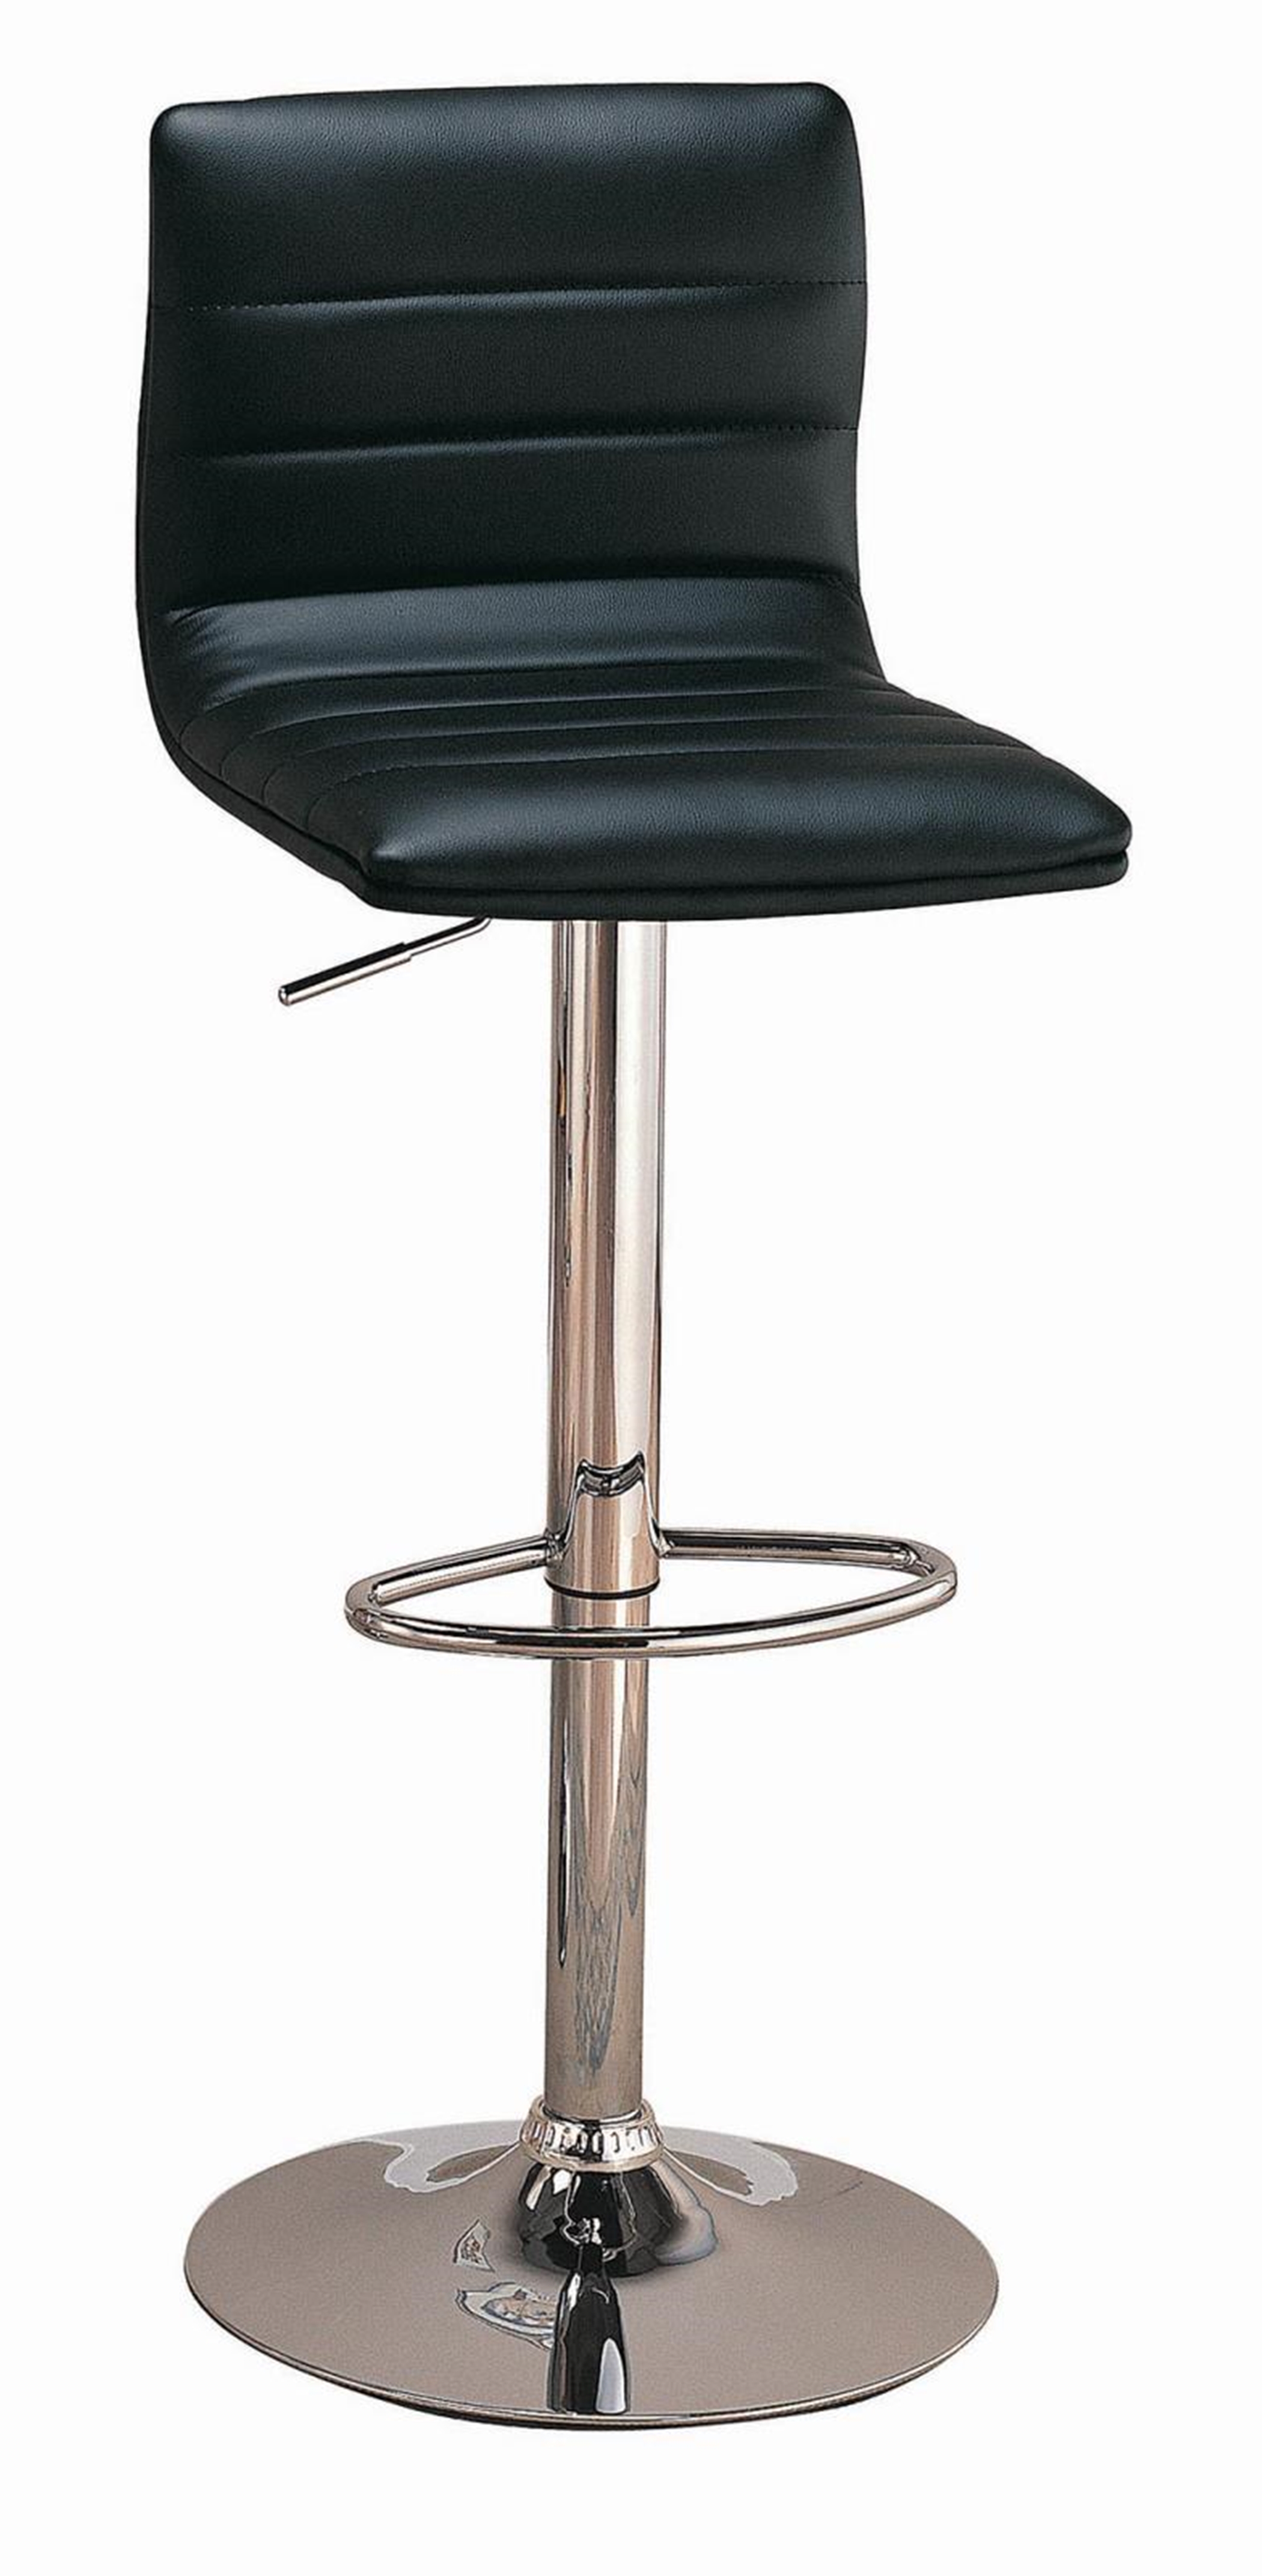 Contemporary Black and Chrome Adjustable Height Bar Stool